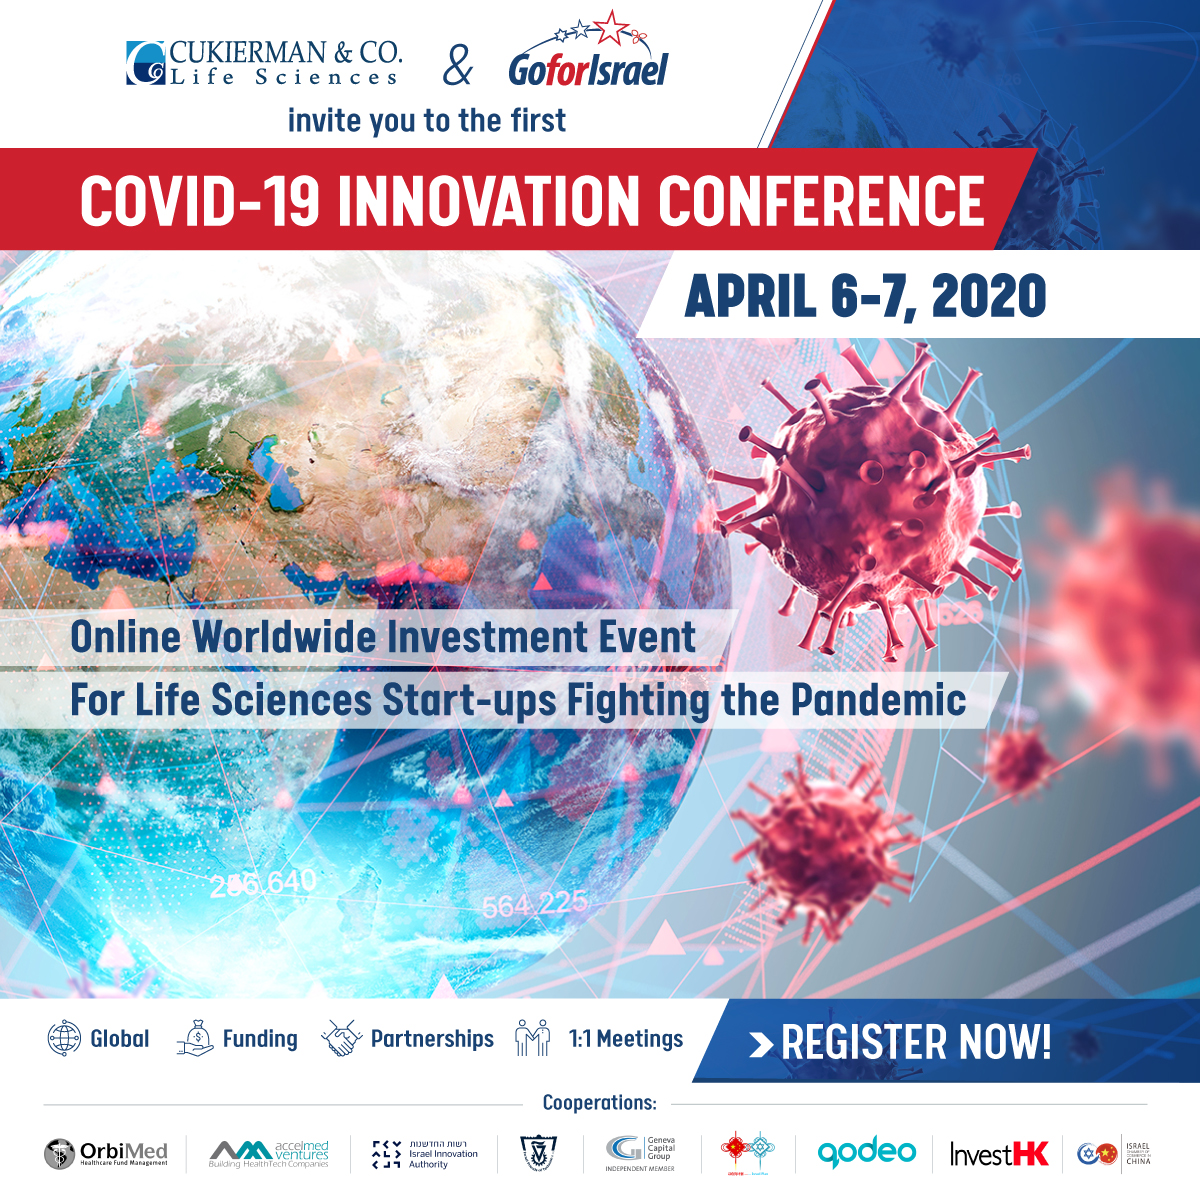 Covid-19 Innovation Conference - Worldwide Online Investment Event